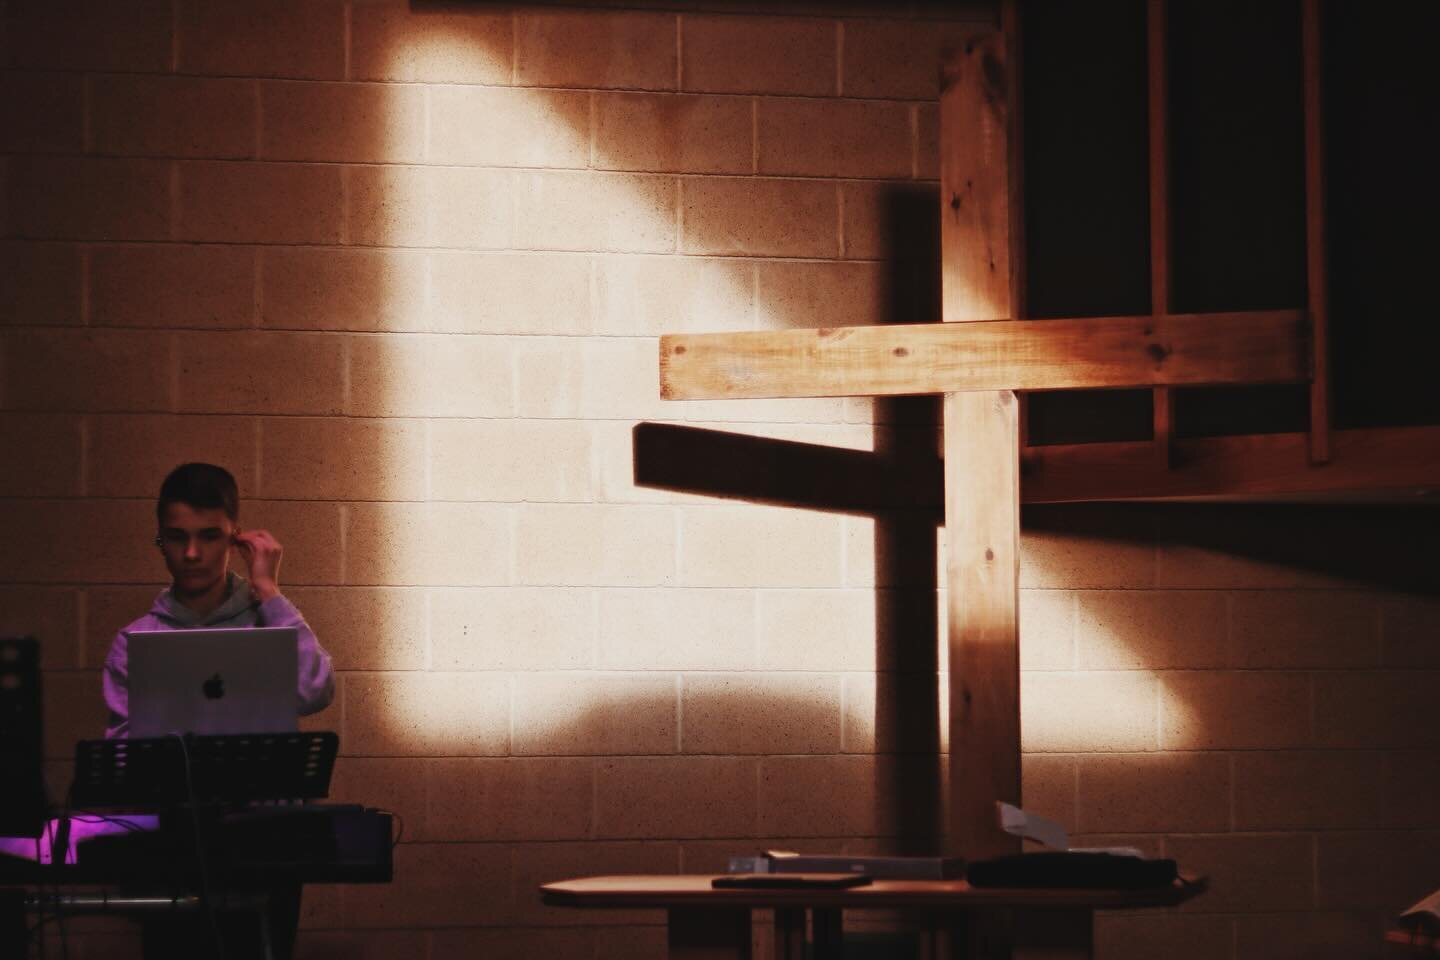 It&rsquo;s the start of Holy Week and 24:7 Prayer at St PB. We&rsquo;d love you to join us as we journey to the cross together. We have a prayer room set up to give you space and time to connect with Jesus. Follow the link in bio to book in between 8